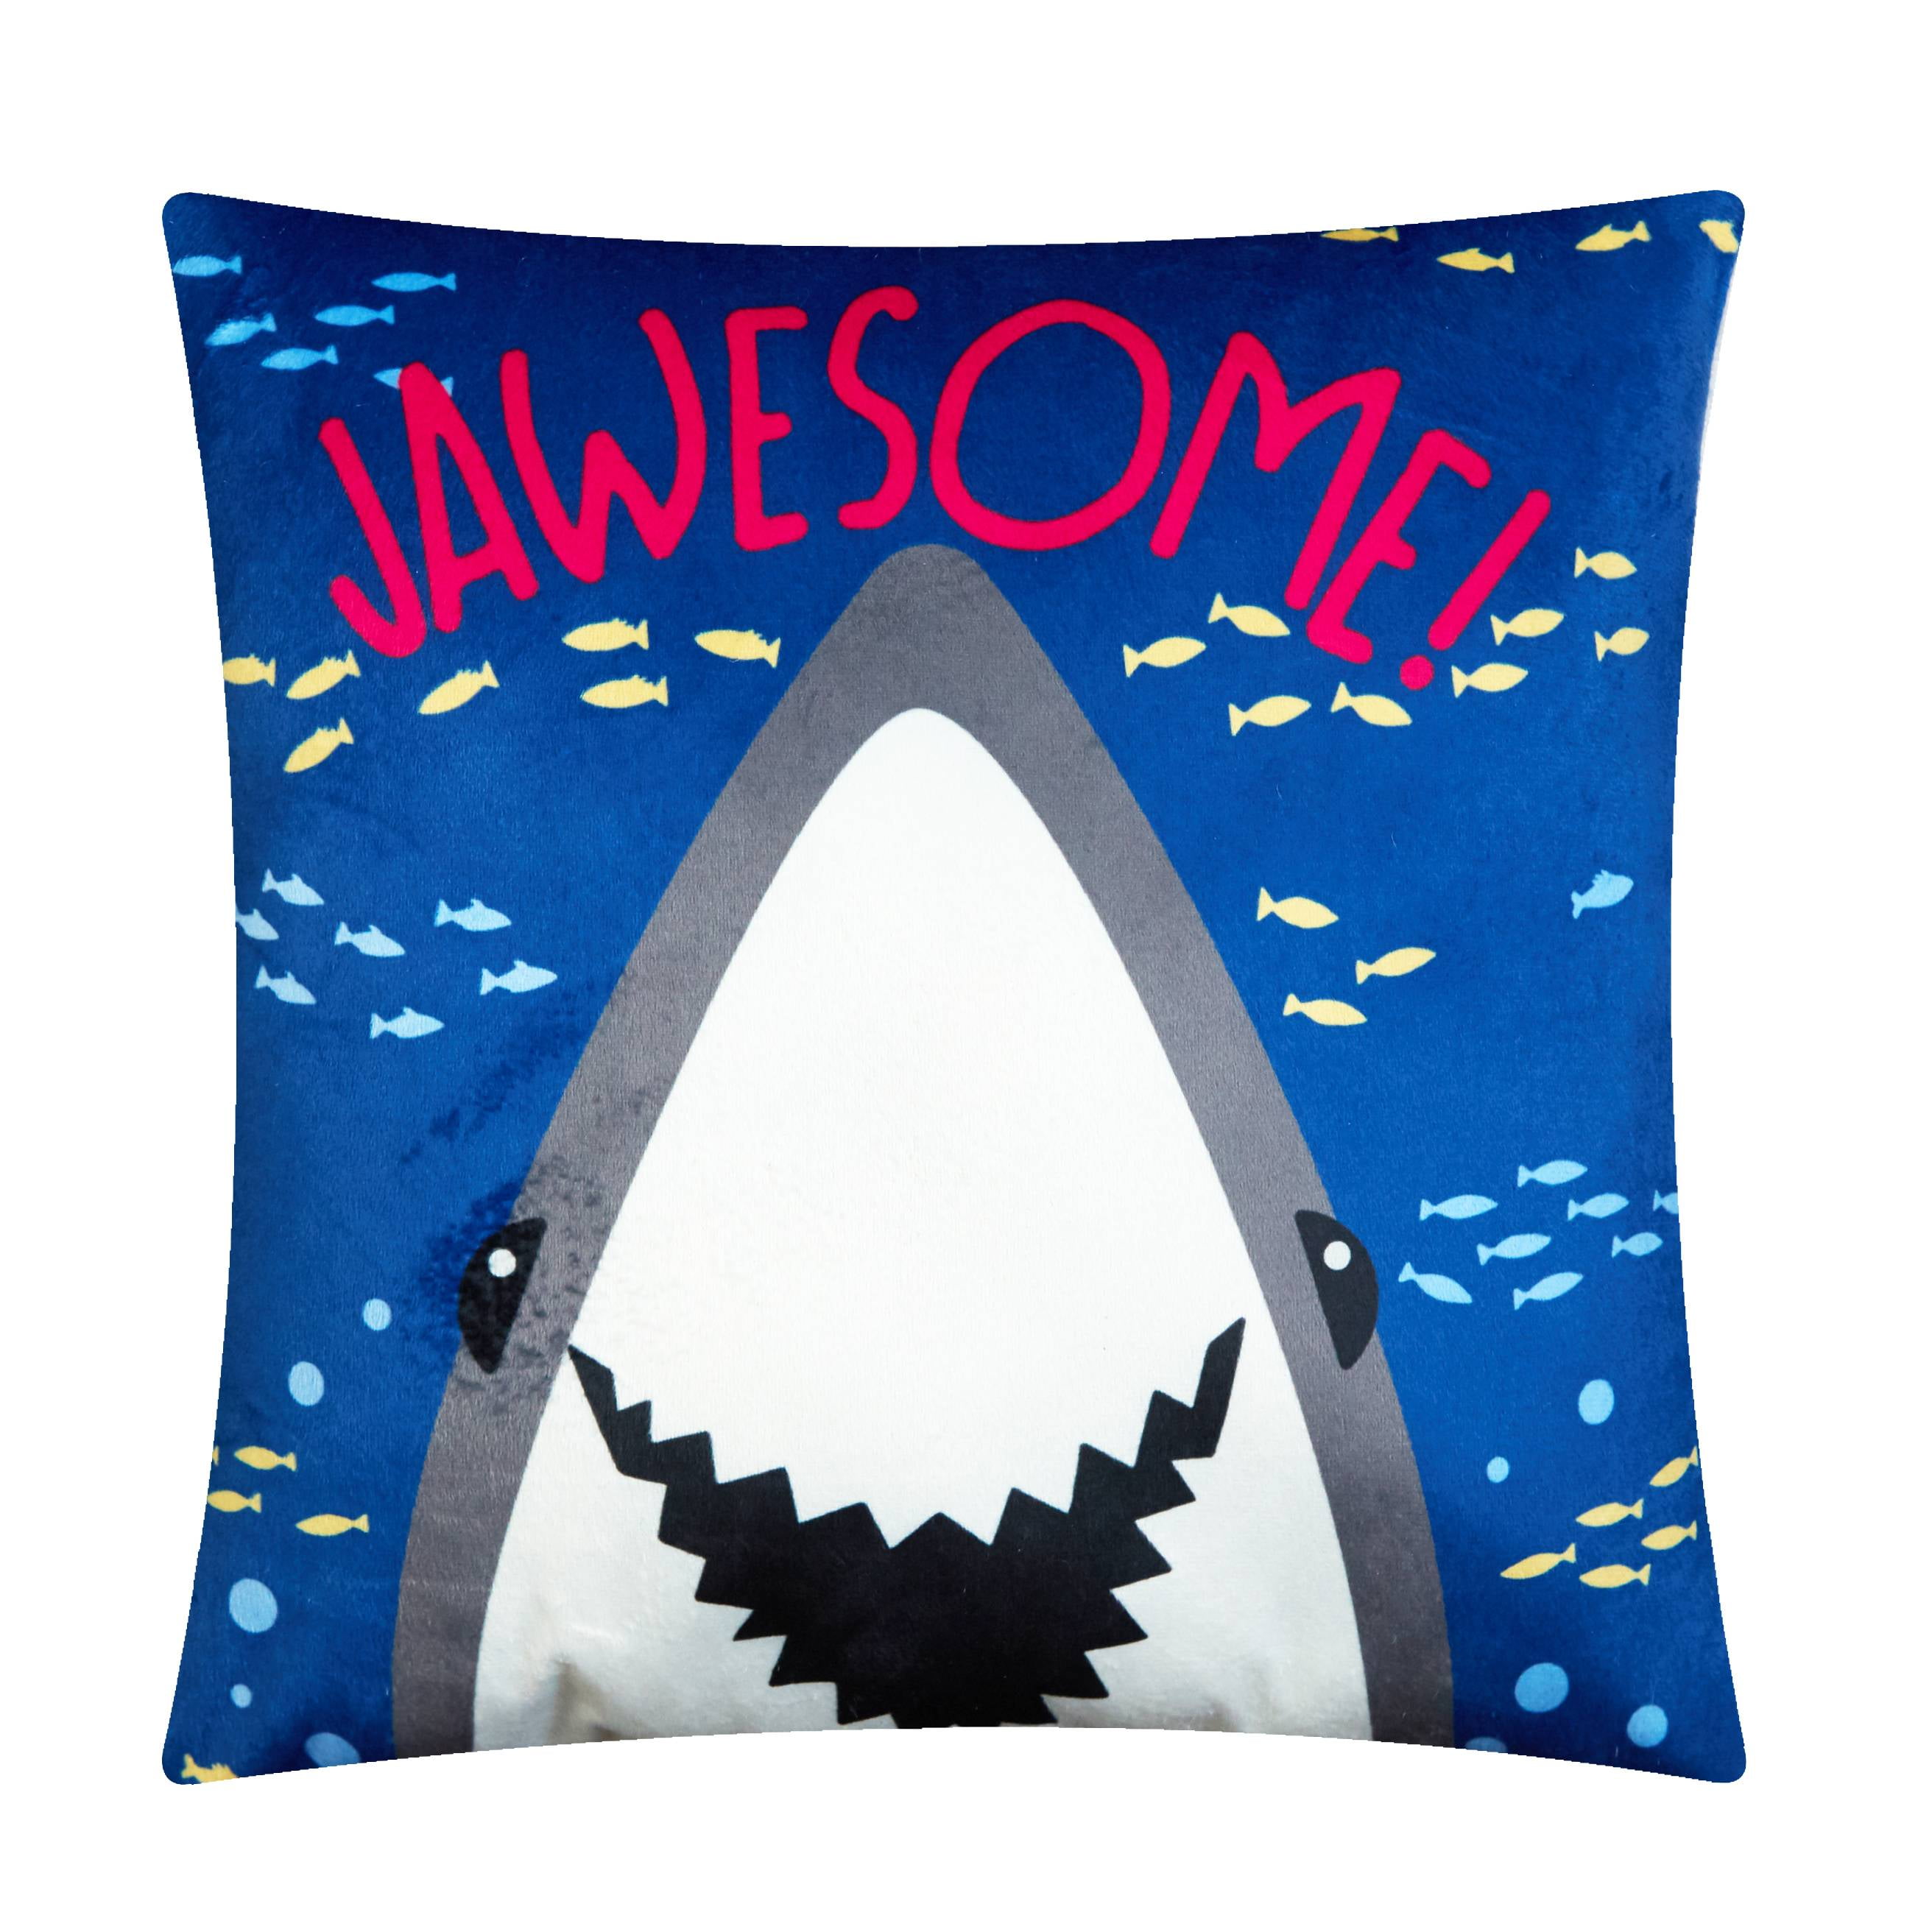 Kids Play Room Decorative Pillow Covers Shark Chewing Bubble Gum Throw Cushion Case